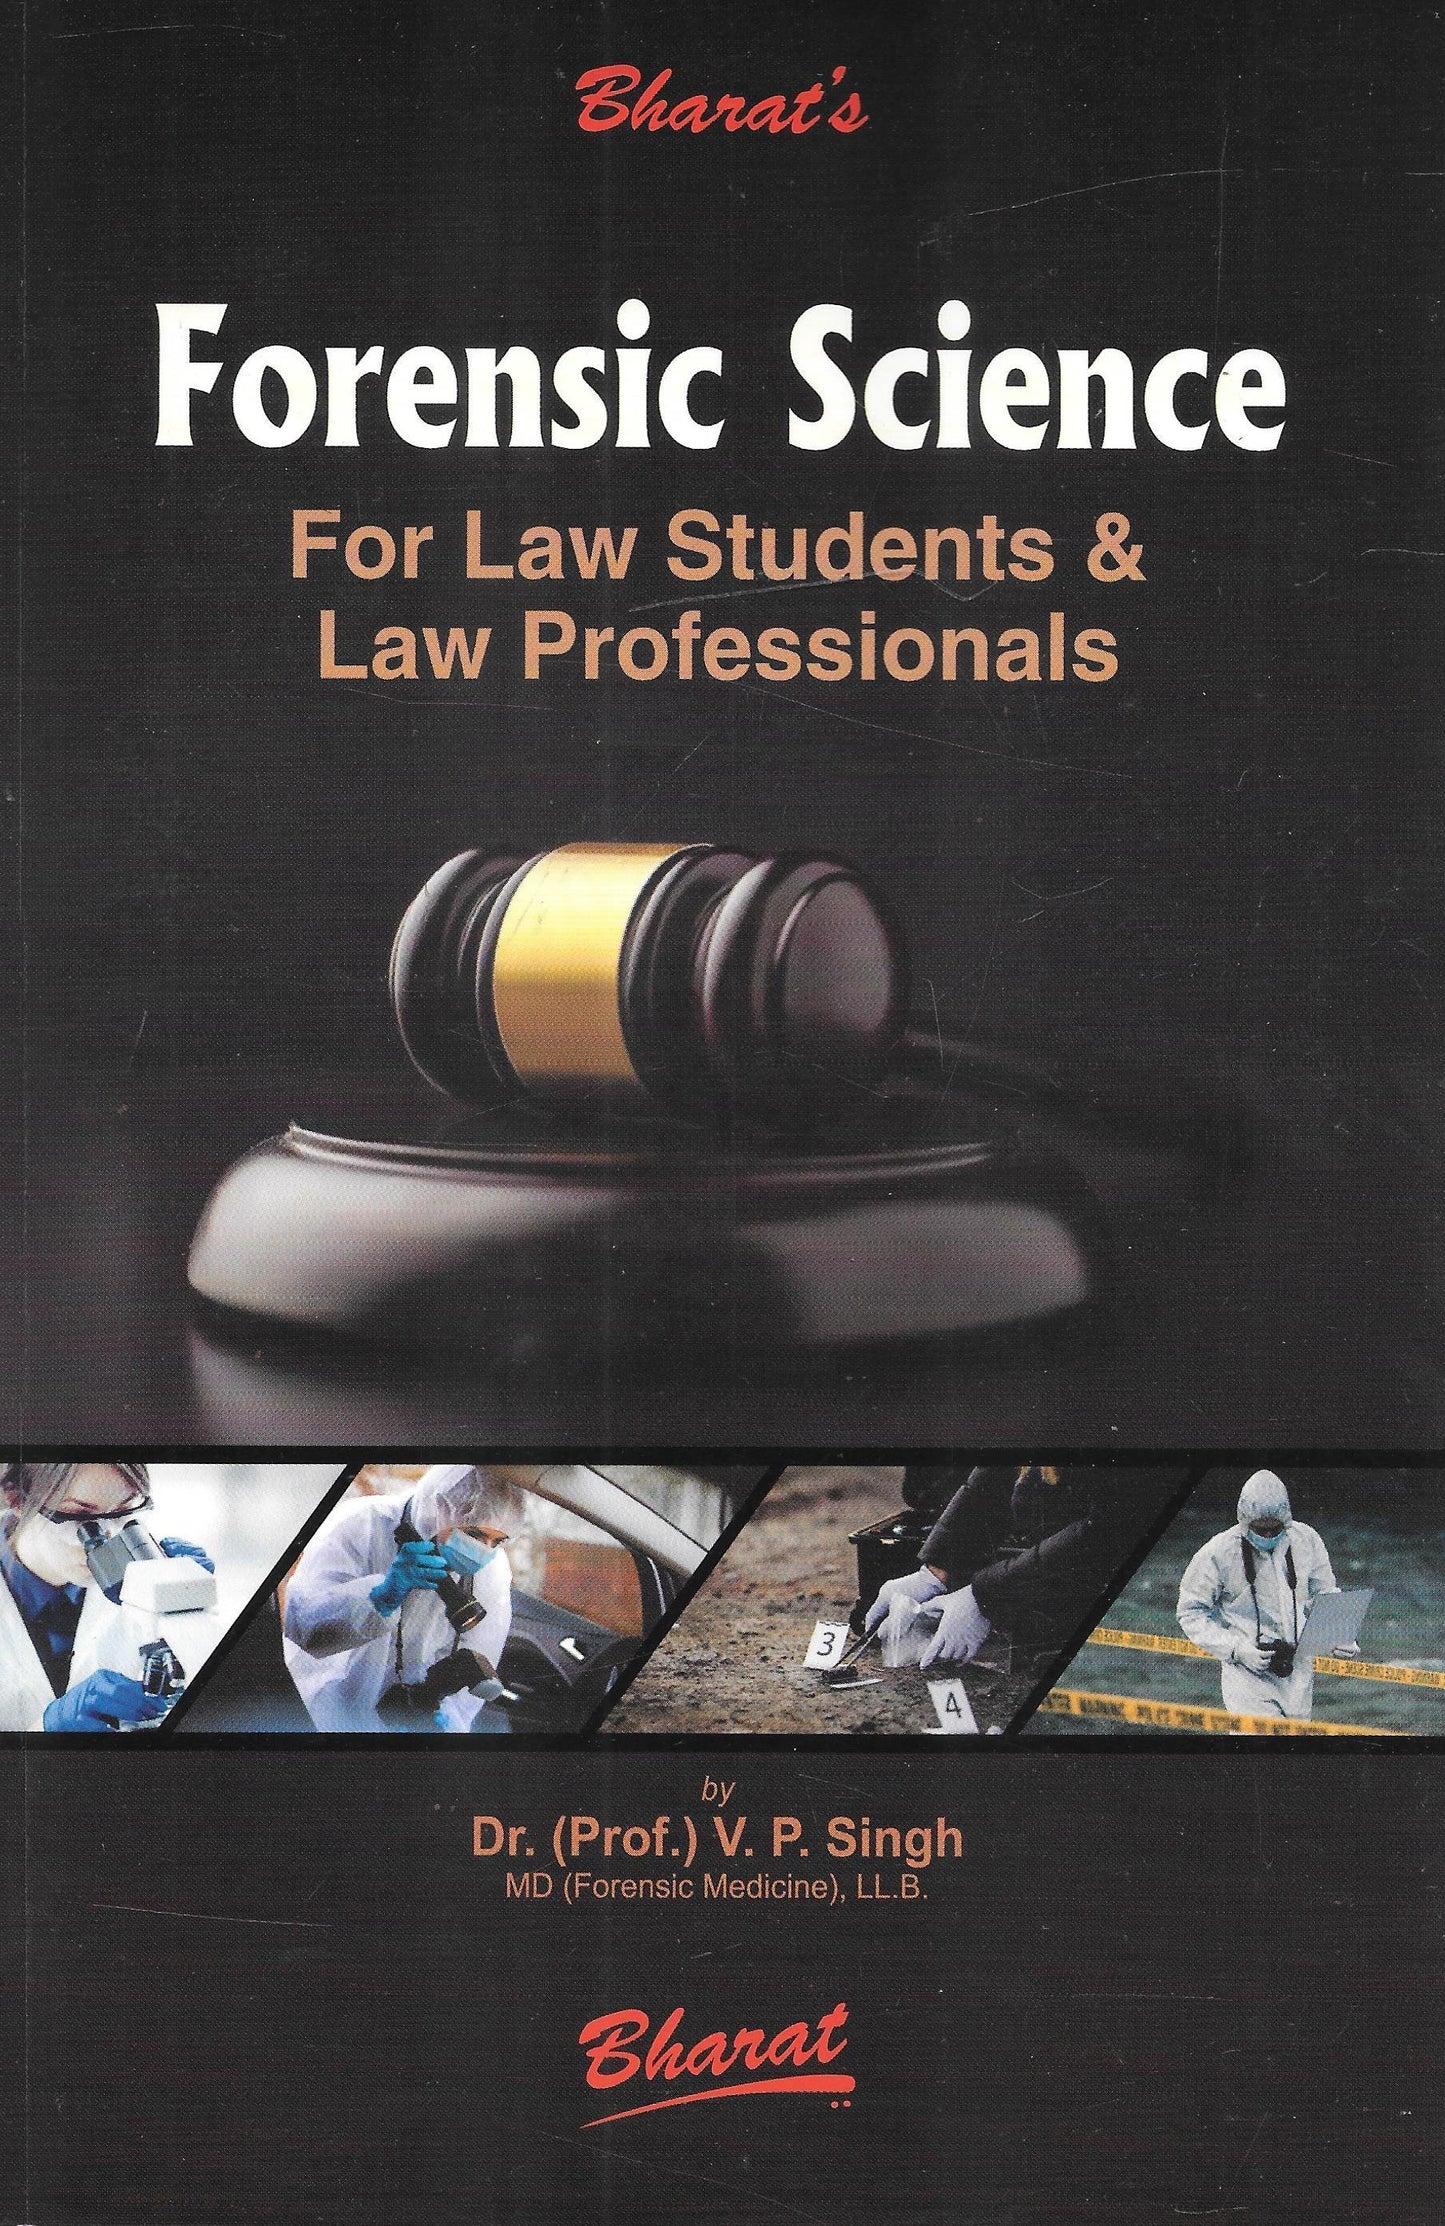 Forensic Science for Law Students & Law Professionals